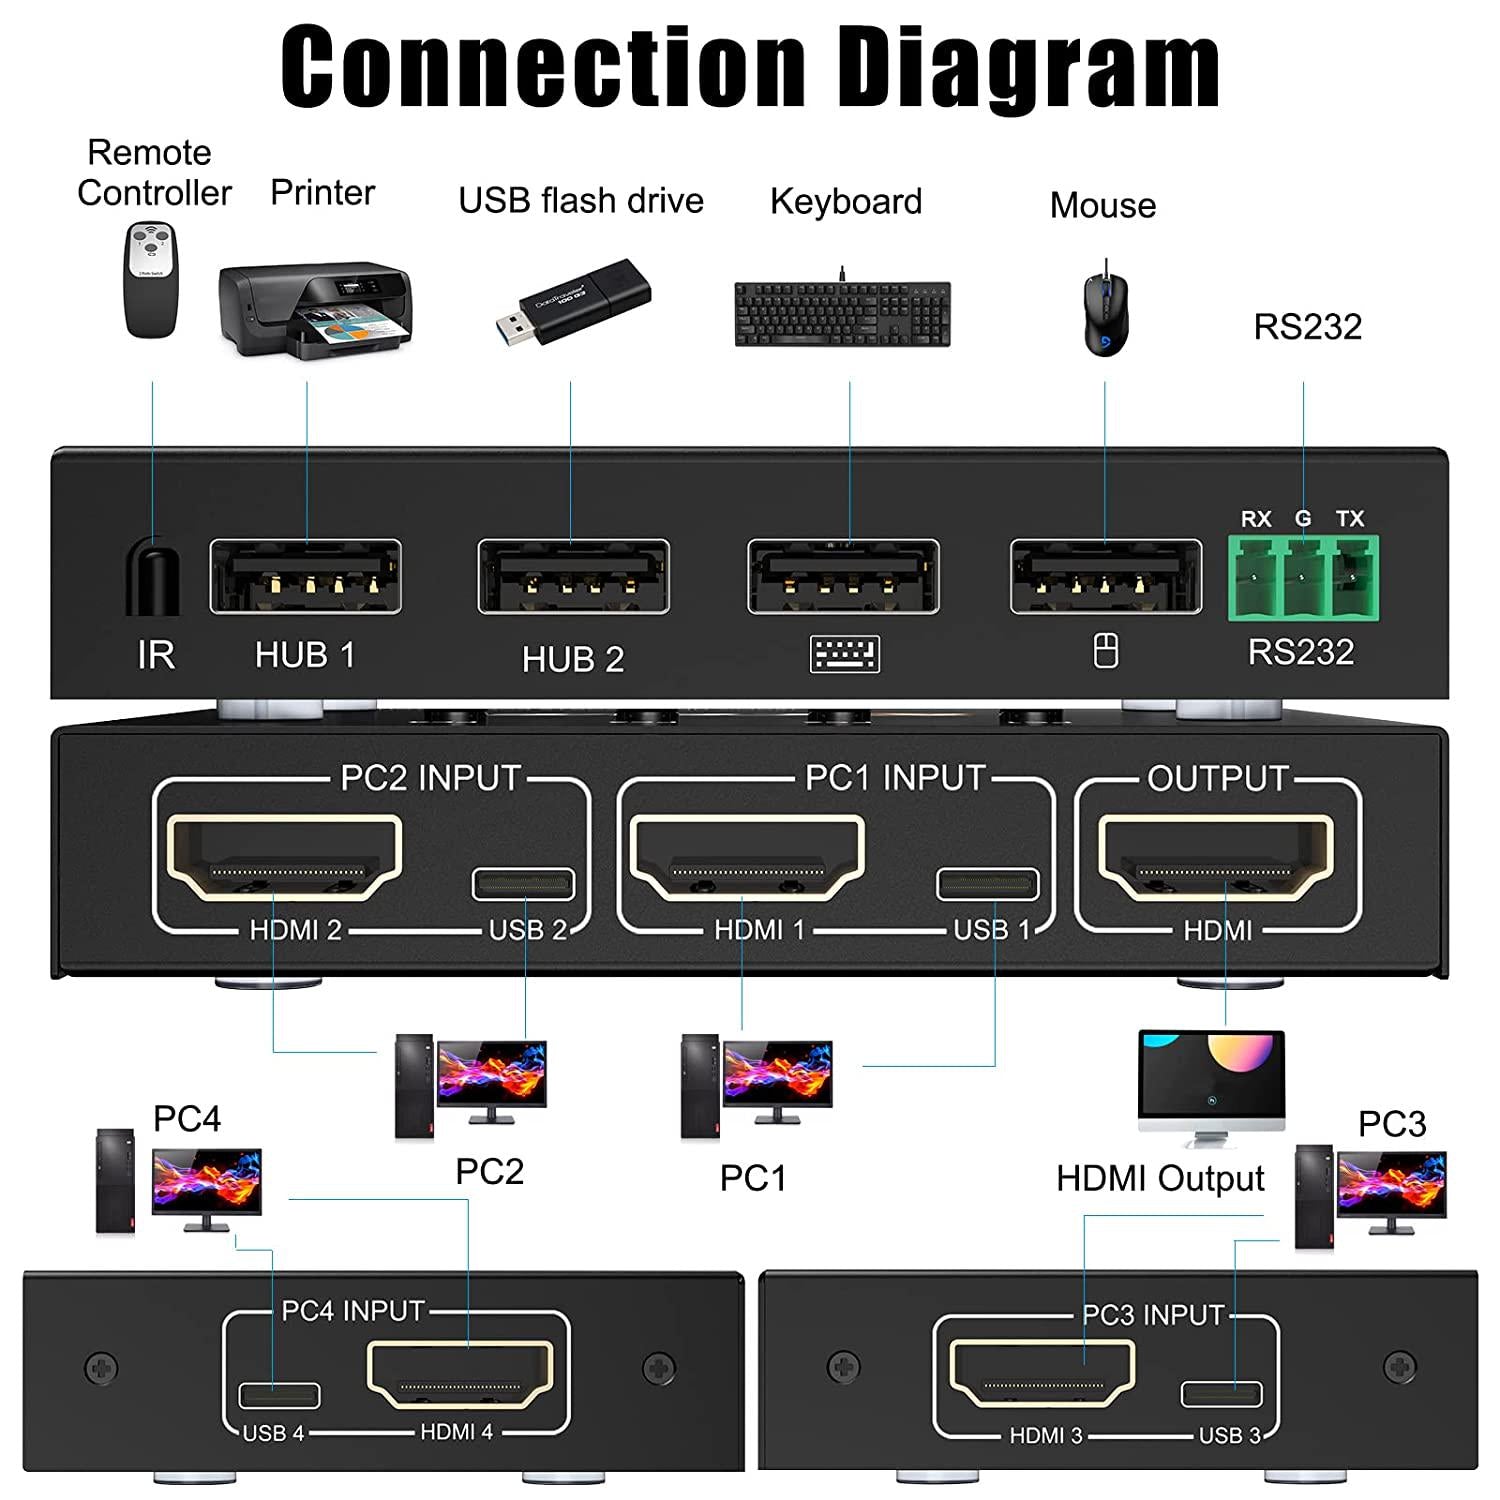 AOOCOO, KVM Switch HDMI, KVM Switch 4 Port 4 in 1 Out USB Switch for 4 Computers Share one HD Monitor and 4 USB 2.0 Devices, Support RS232 Serial, UHB 4K@60Hz, Wireless Keyboard and Mouse